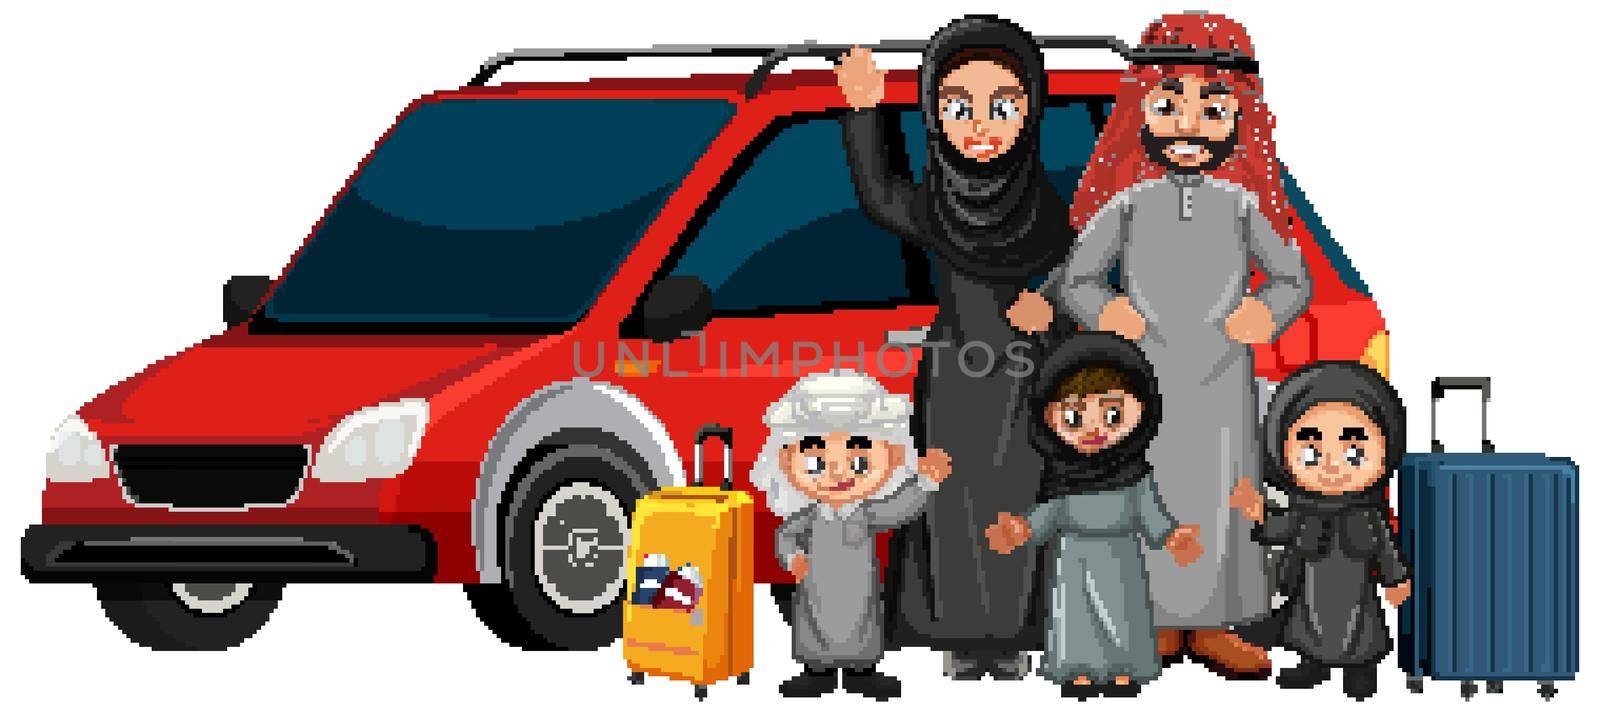 Arab family on holiday by iimages